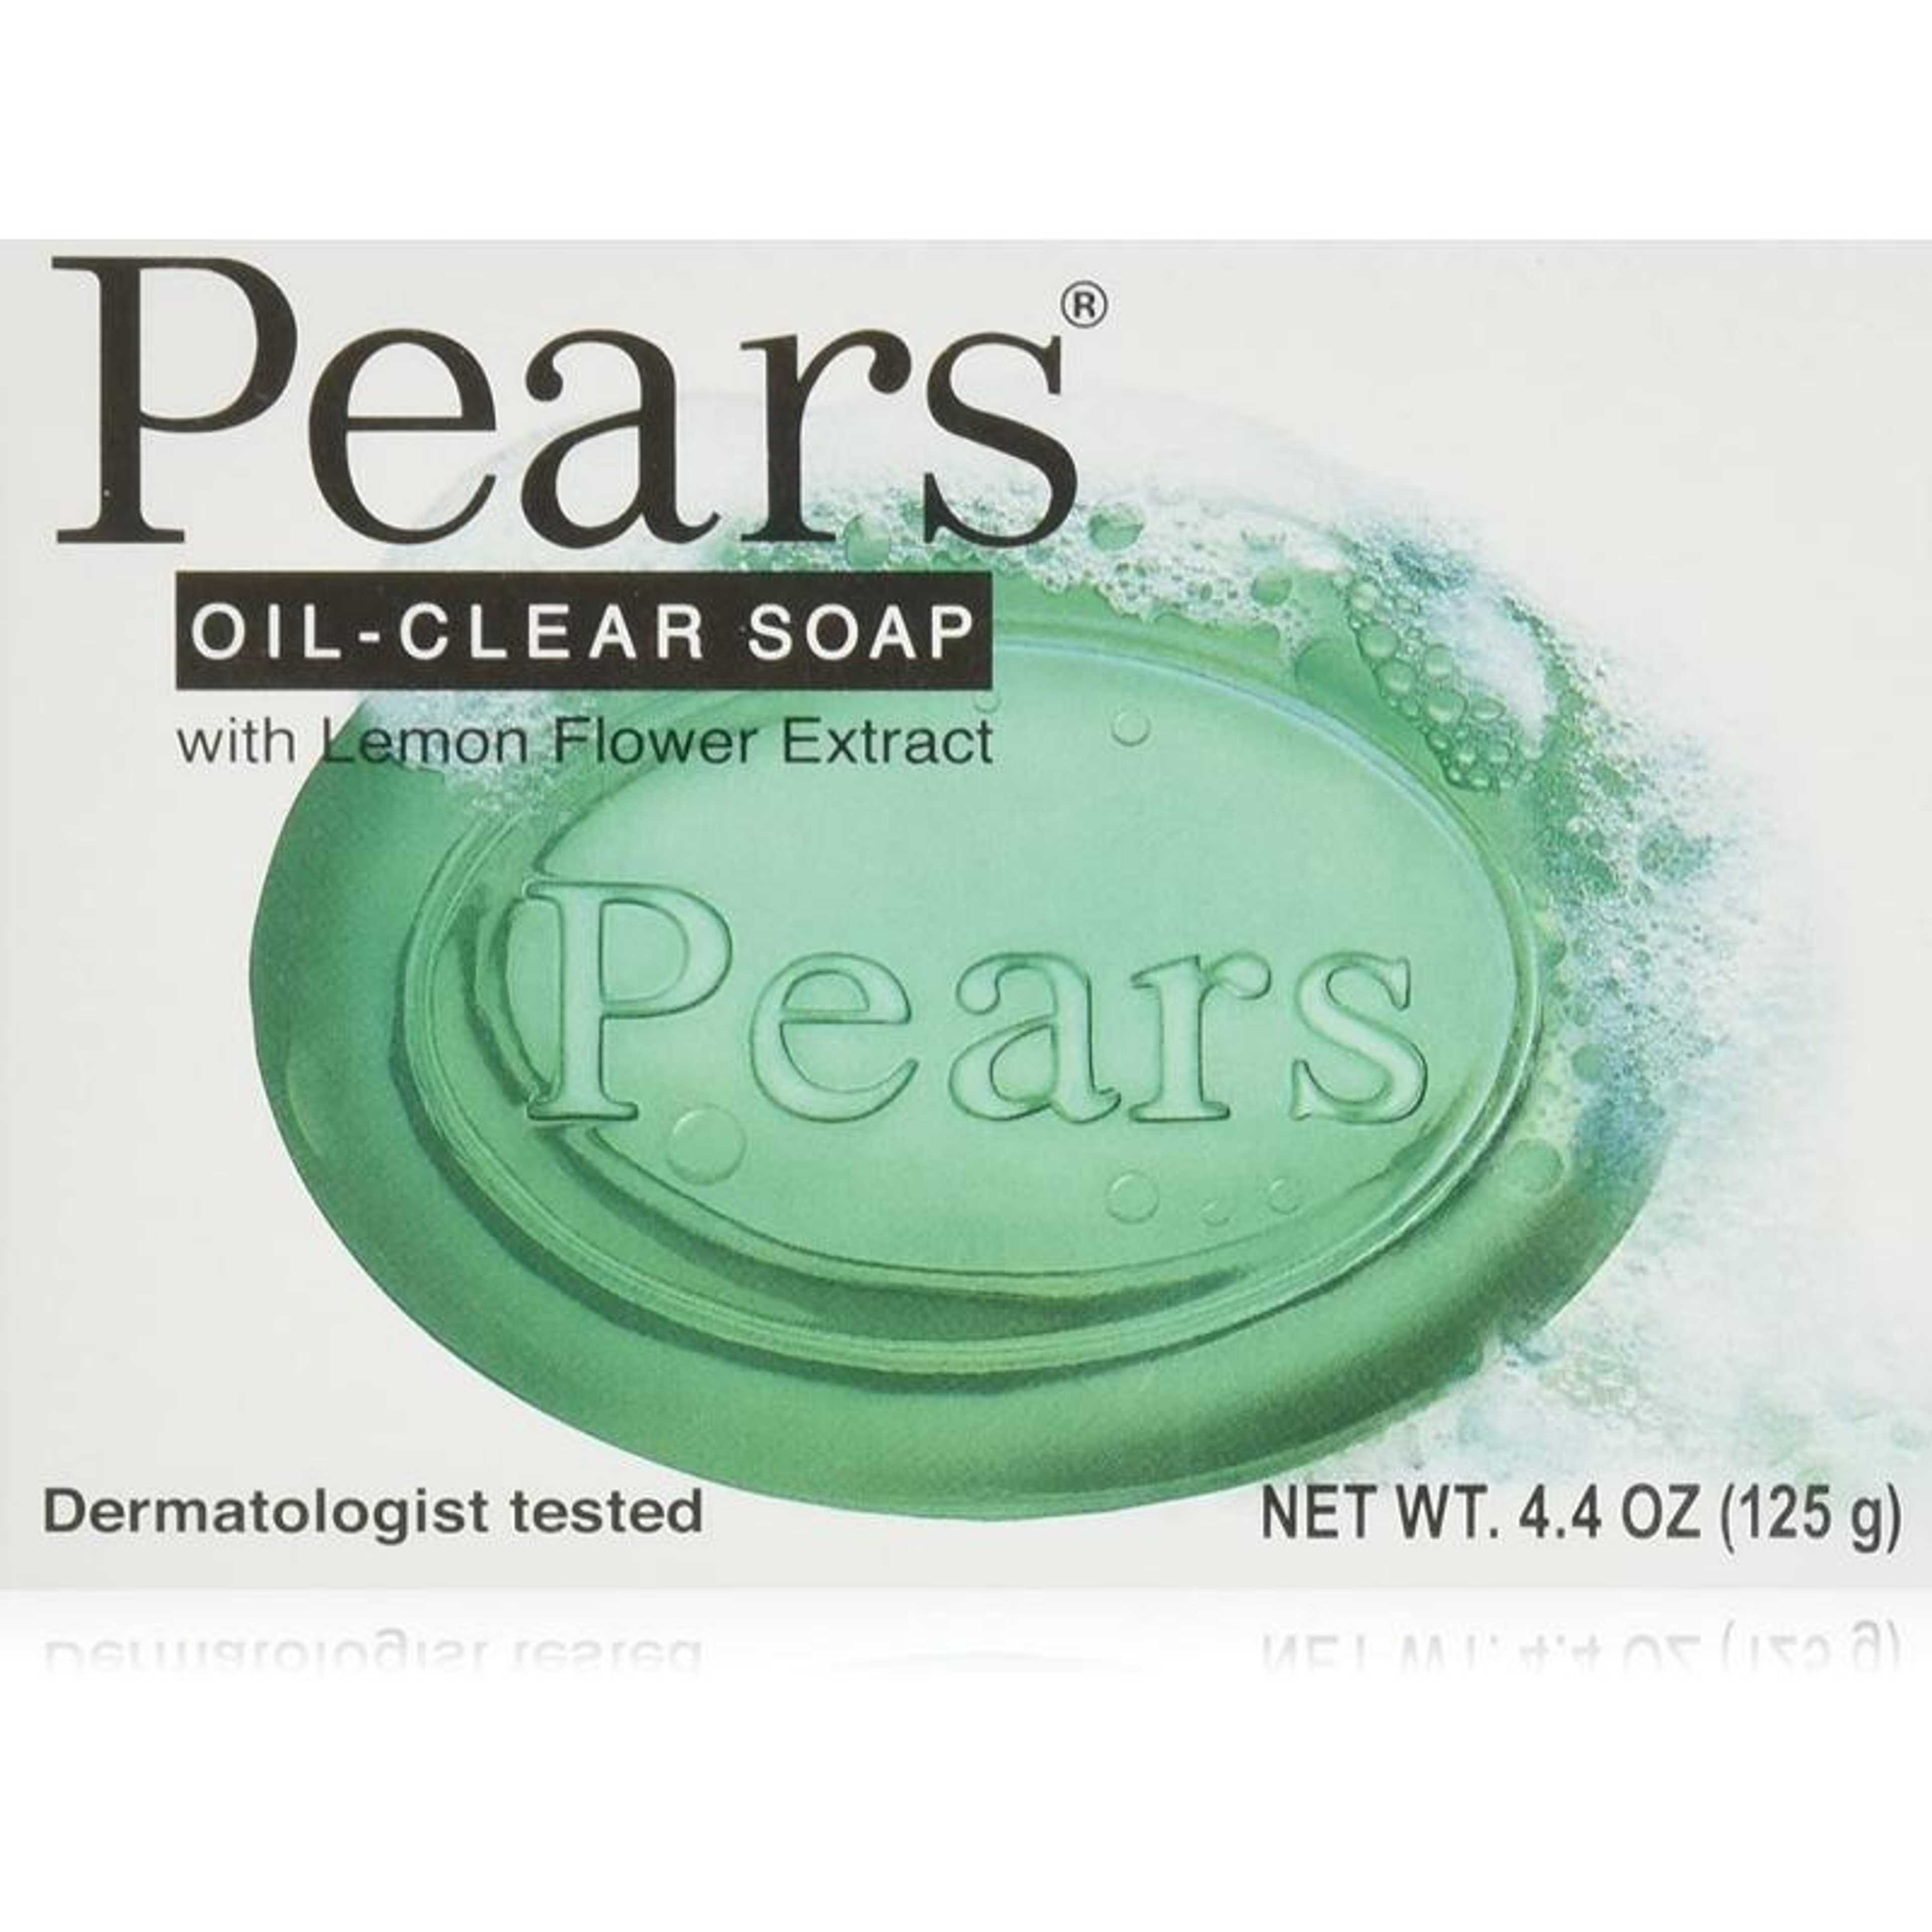 "Pears Soap Oil Clear With Lemon Flower Extract 125g "